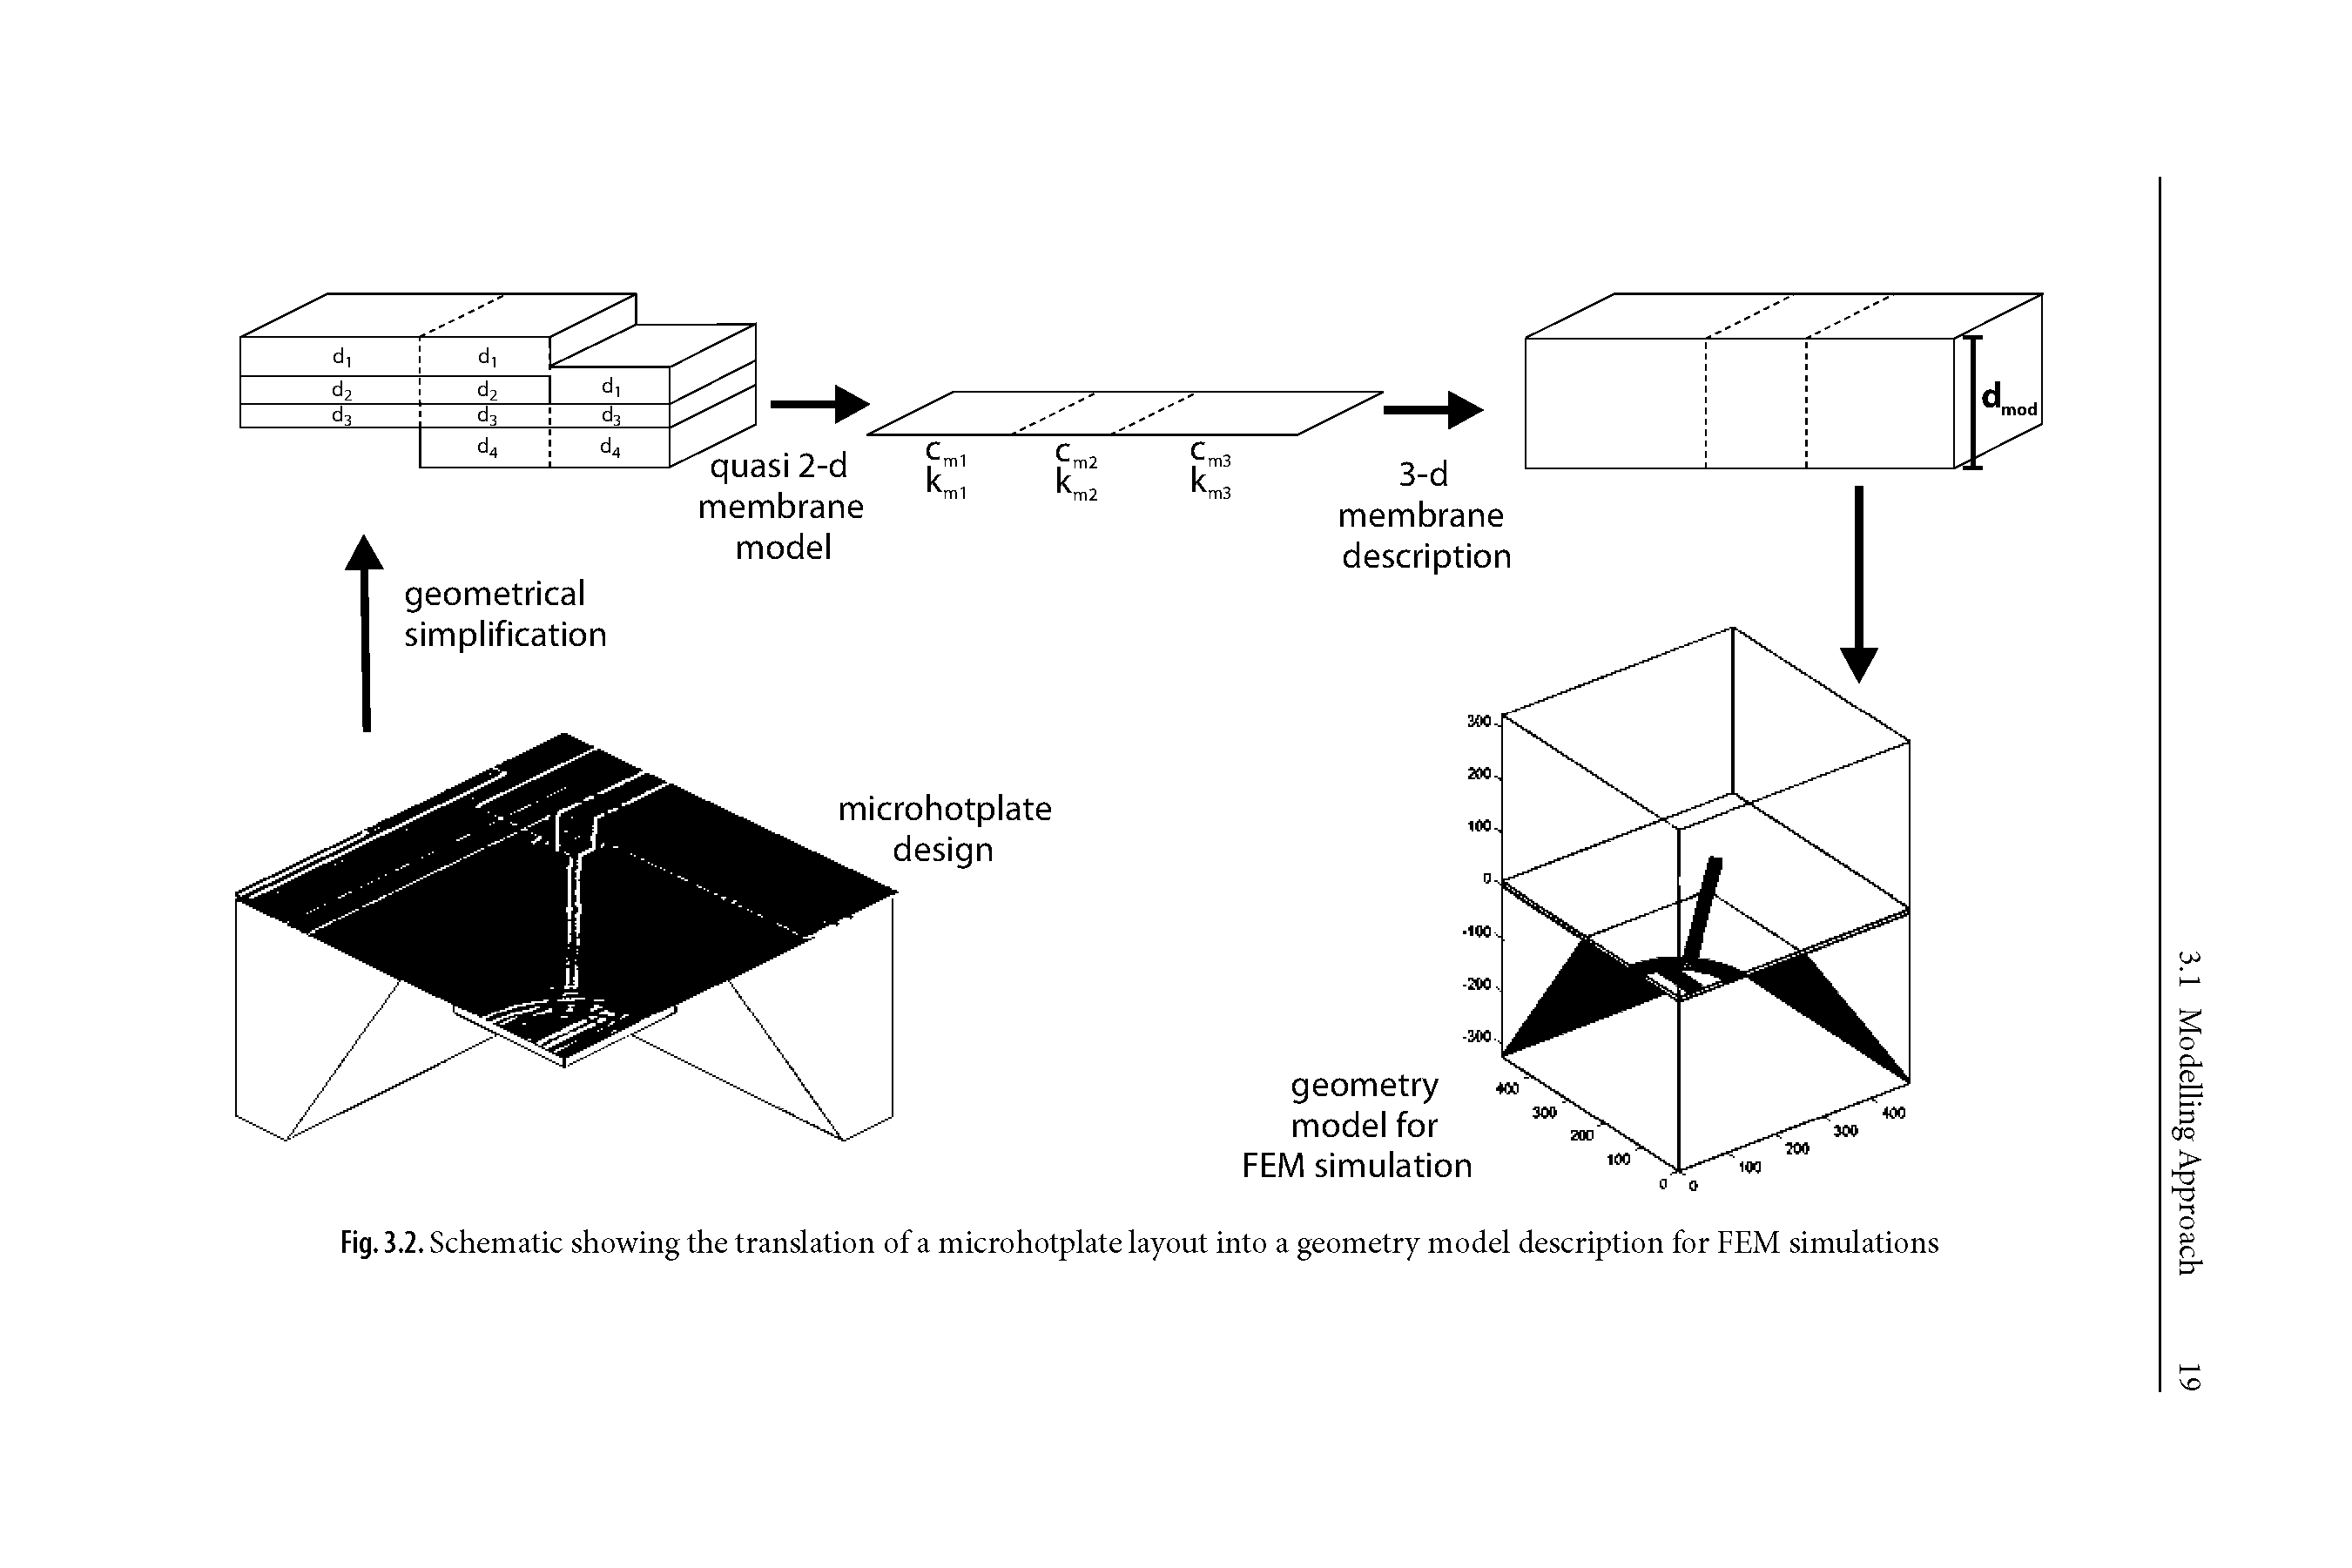 Fig. 3.2. Schematic showing the translation of a microhotplate layout into a geometry model description for FEM simulations...